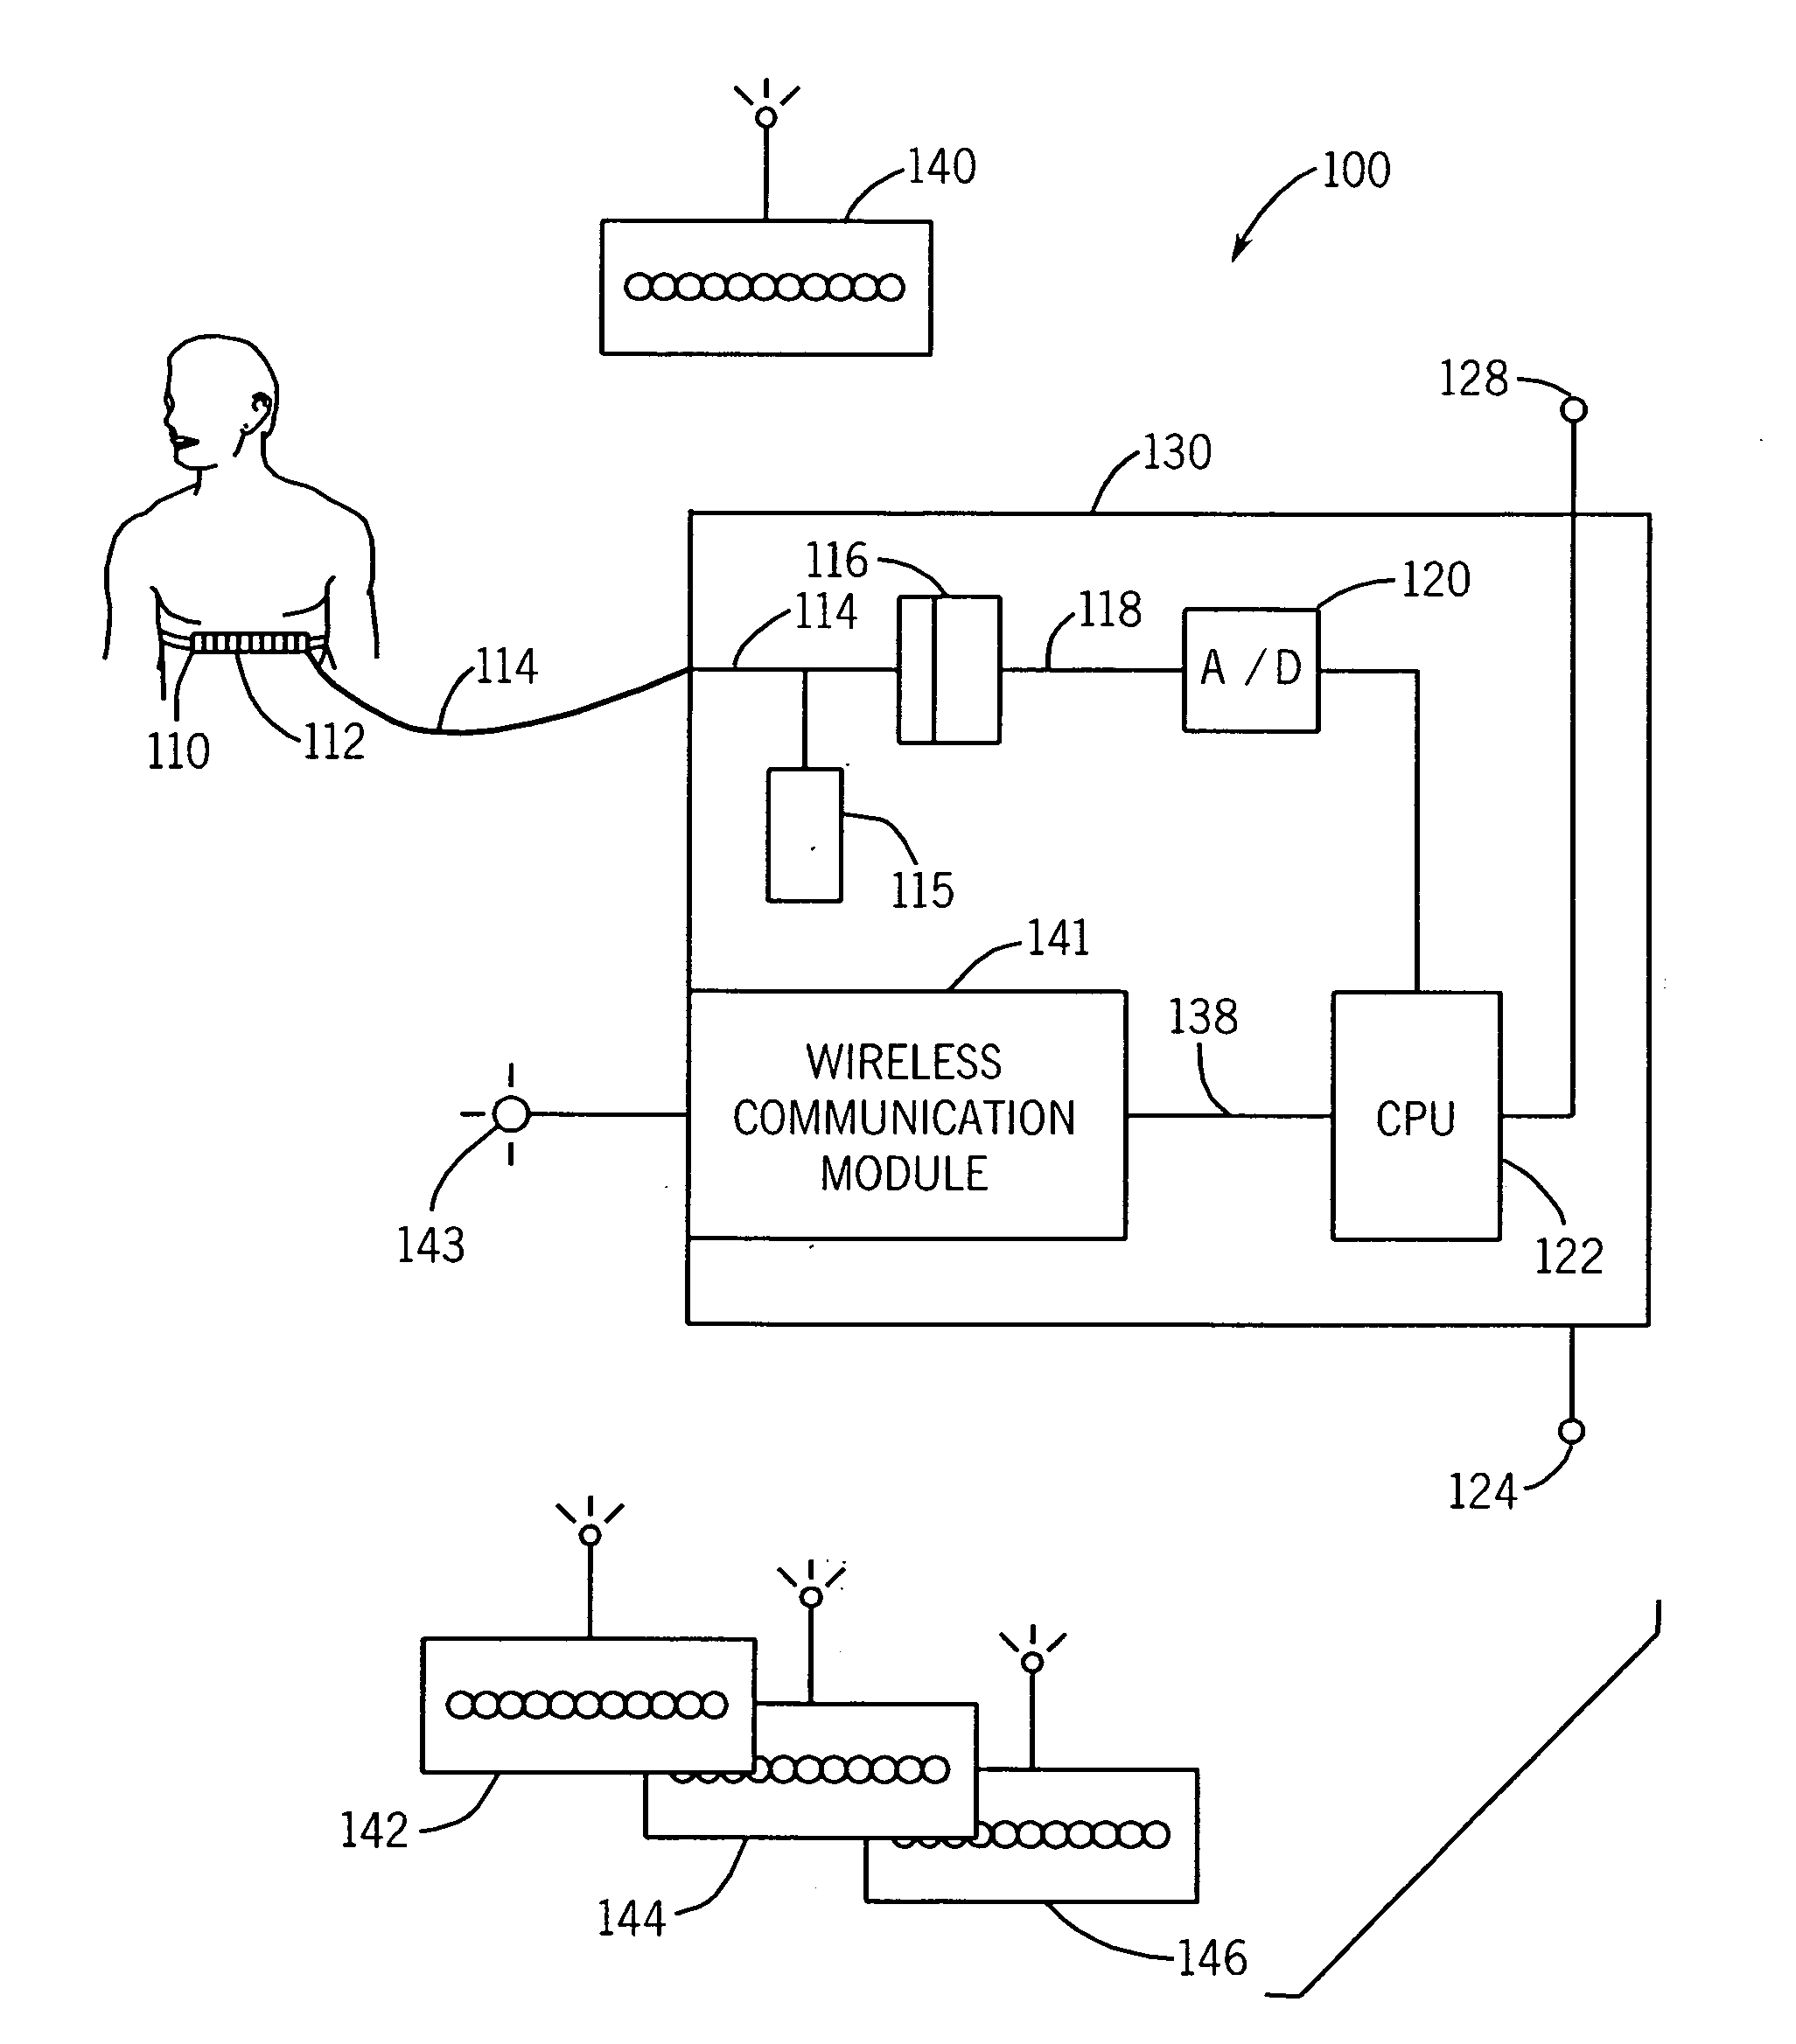 Motion monitor system for use with imaging systems